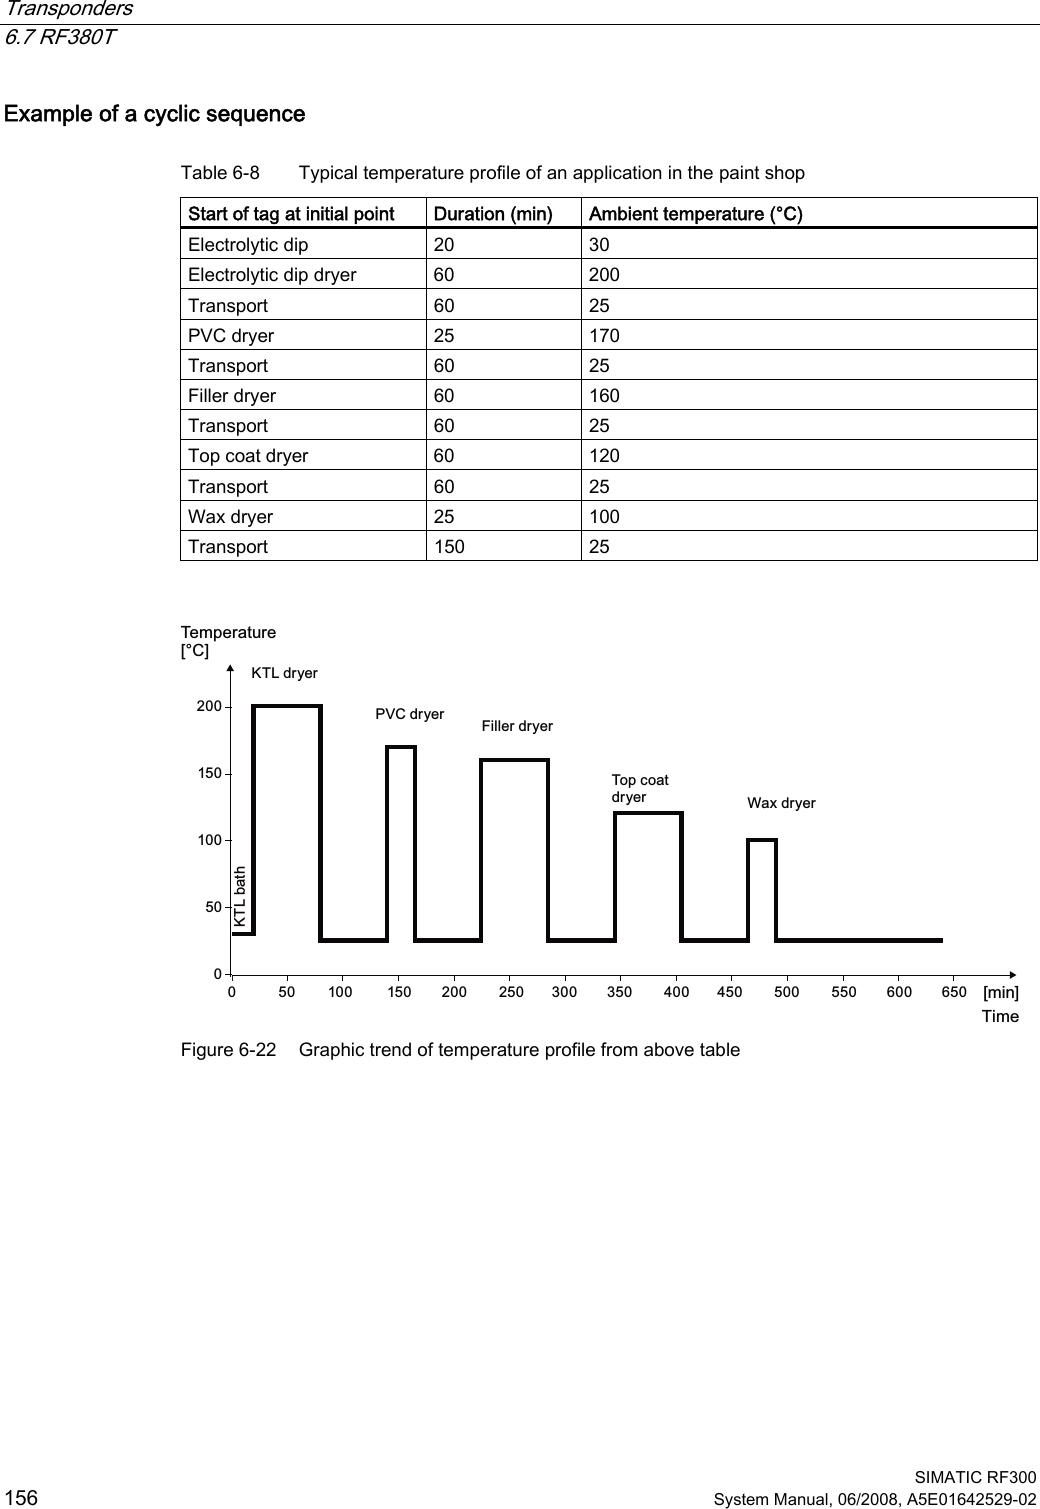 Transponders   6.7 RF380T  SIMATIC RF300 156 System Manual, 06/2008, A5E01642529-02 Example of a cyclic sequence Table 6-8  Typical temperature profile of an application in the paint shop Start of tag at initial point  Duration (min)  Ambient temperature (°C) Electrolytic dip  20  30 Electrolytic dip dryer  60  200 Transport  60  25 PVC dryer  25  170 Transport  60  25 Filler dryer  60  160 Transport  60  25 Top coat dryer  60  120 Transport  60  25 Wax dryer  25  100 Transport  150  25  7HPSHUDWXUH.7/EDWK7LPH.7/GU\HU39&amp;GU\HU )LOOHUGU\HU7RSFRDWGU\HU :D[GU\HU&gt;PLQ@&gt;r&amp;@             Figure 6-22  Graphic trend of temperature profile from above table 